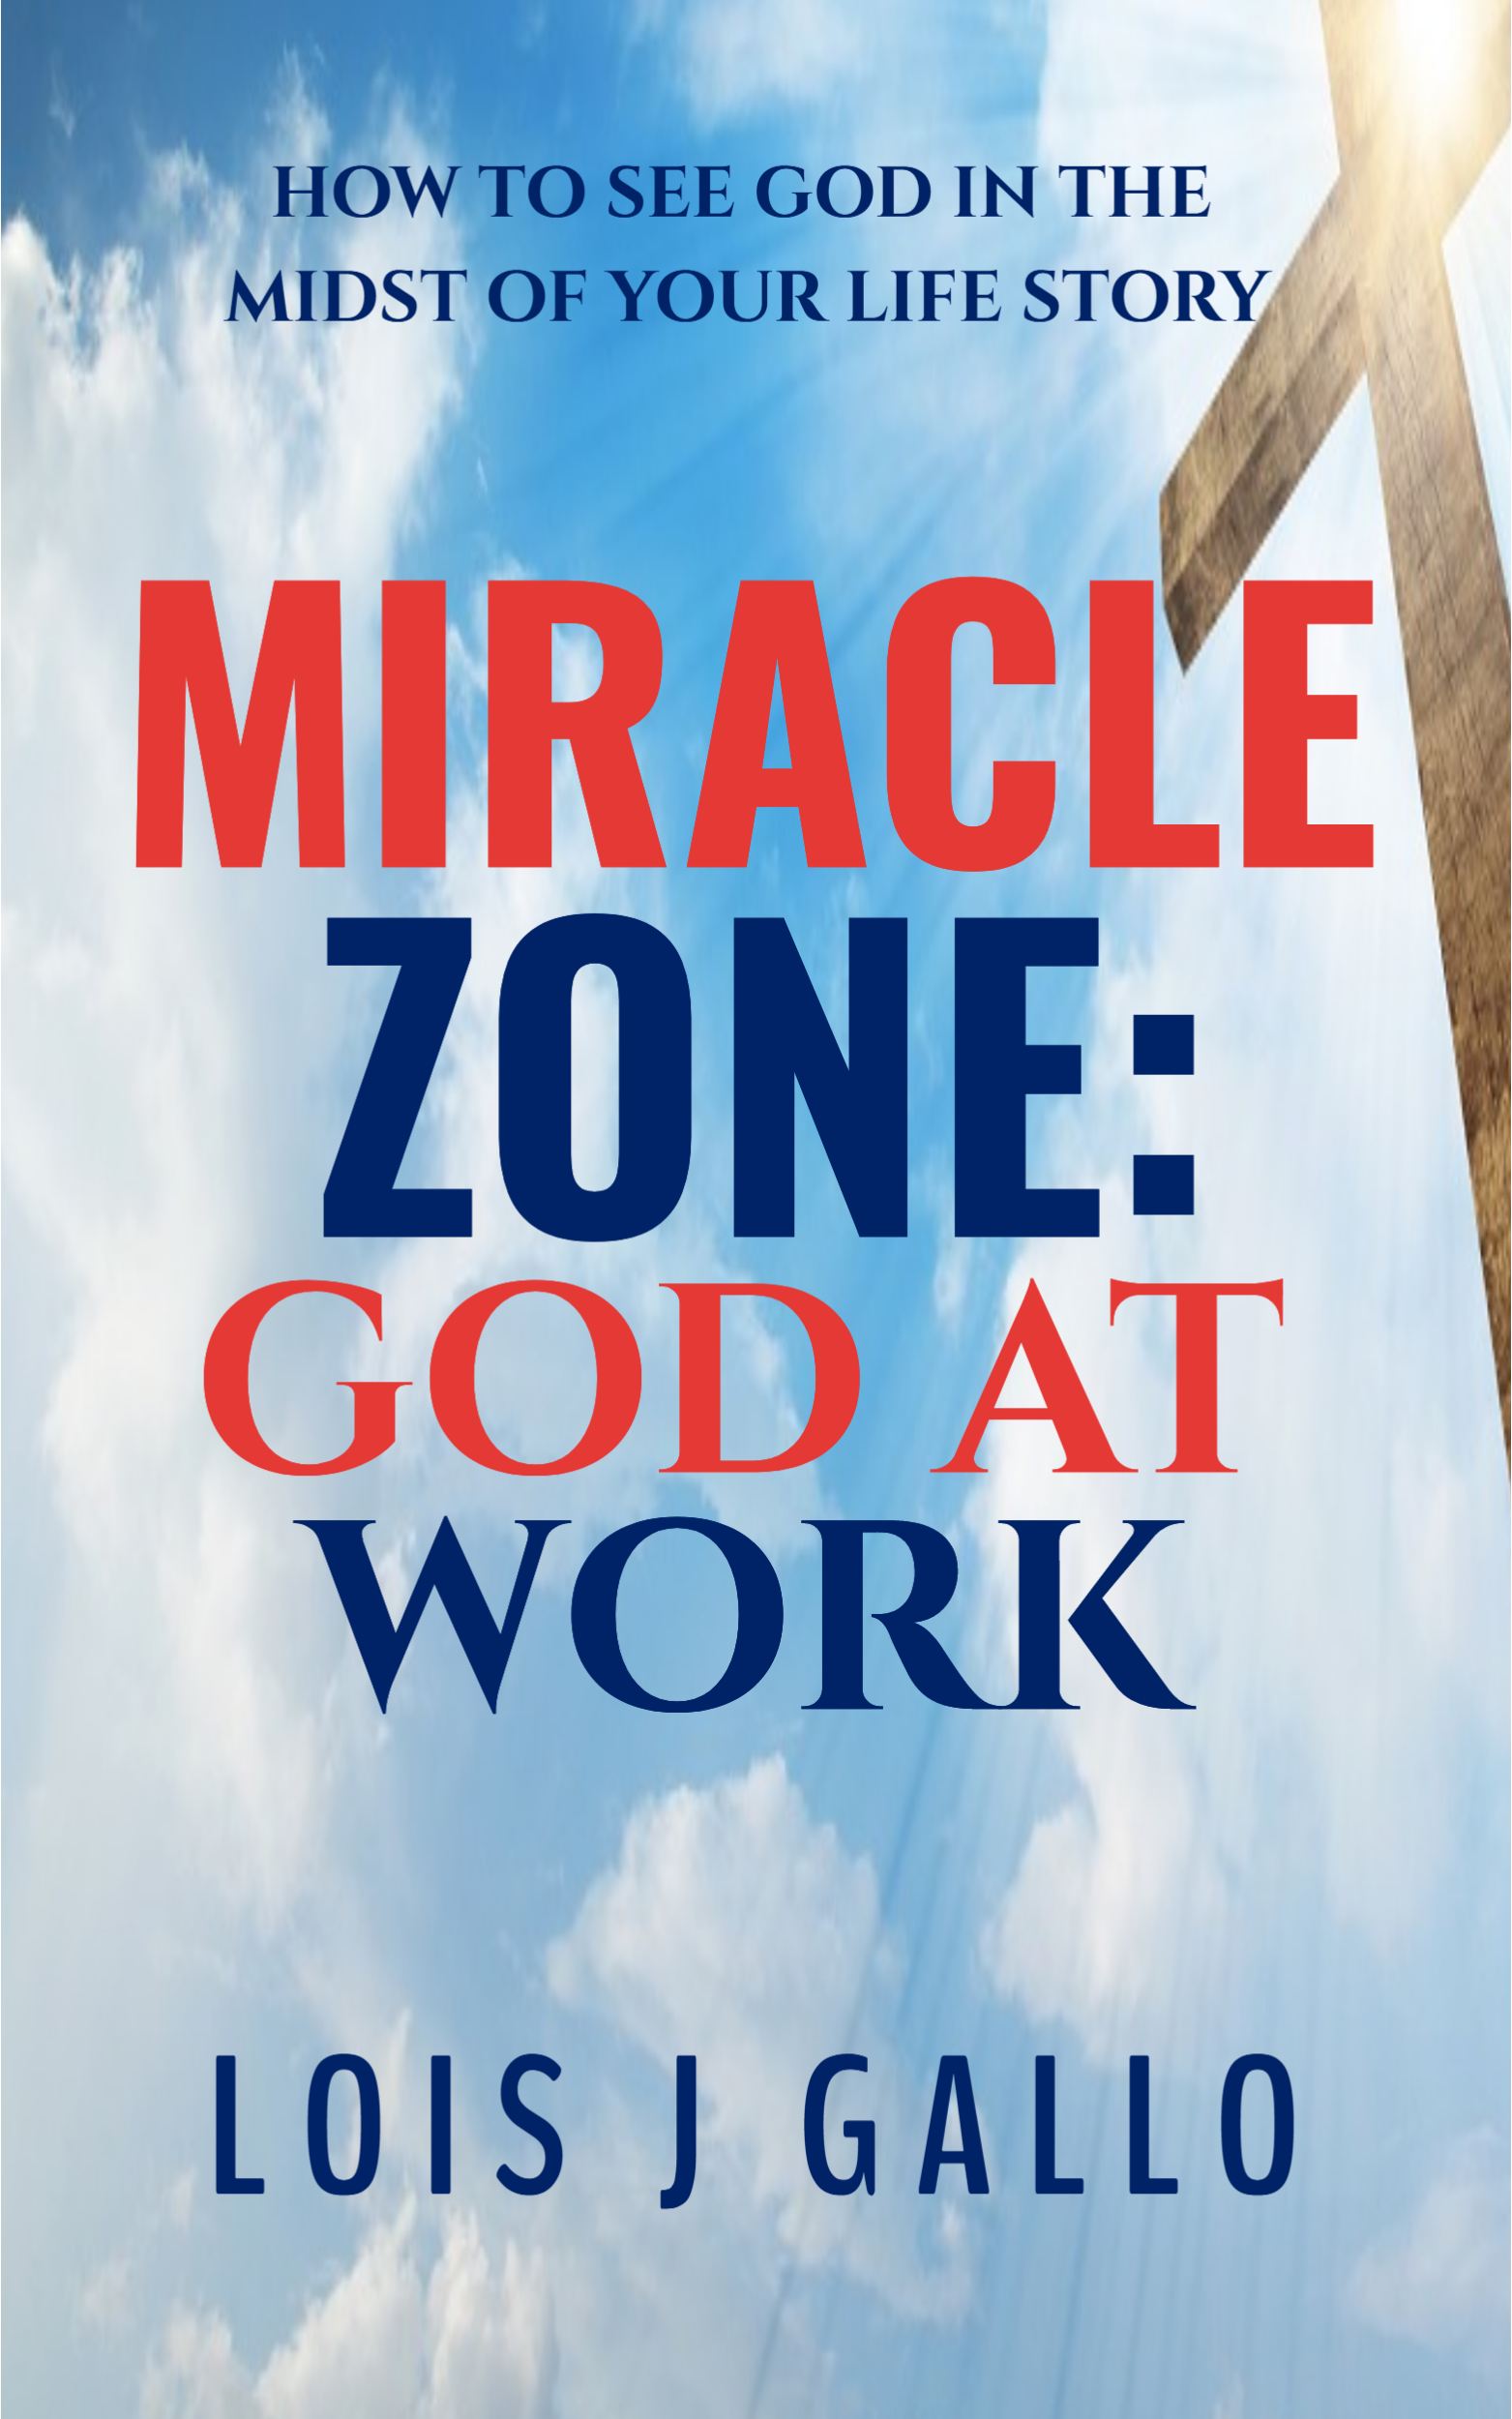 Miracle Zone: God At Work - book cover updated by Lois Gallo